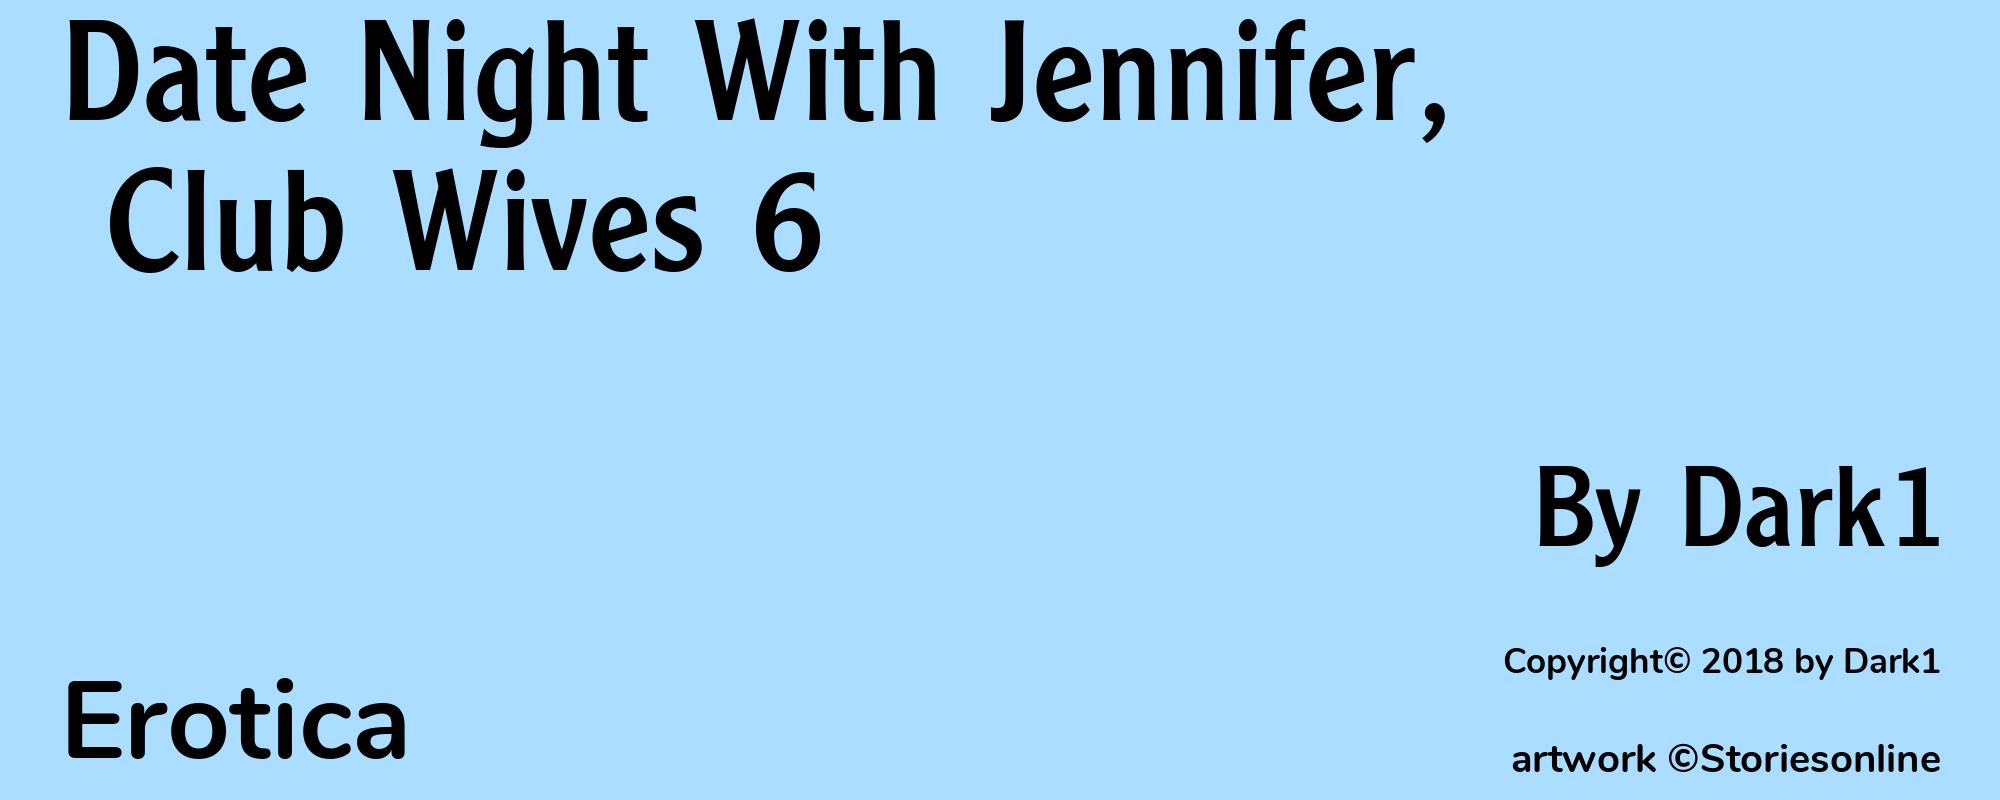 Date Night With Jennifer, Club Wives 6 - Cover